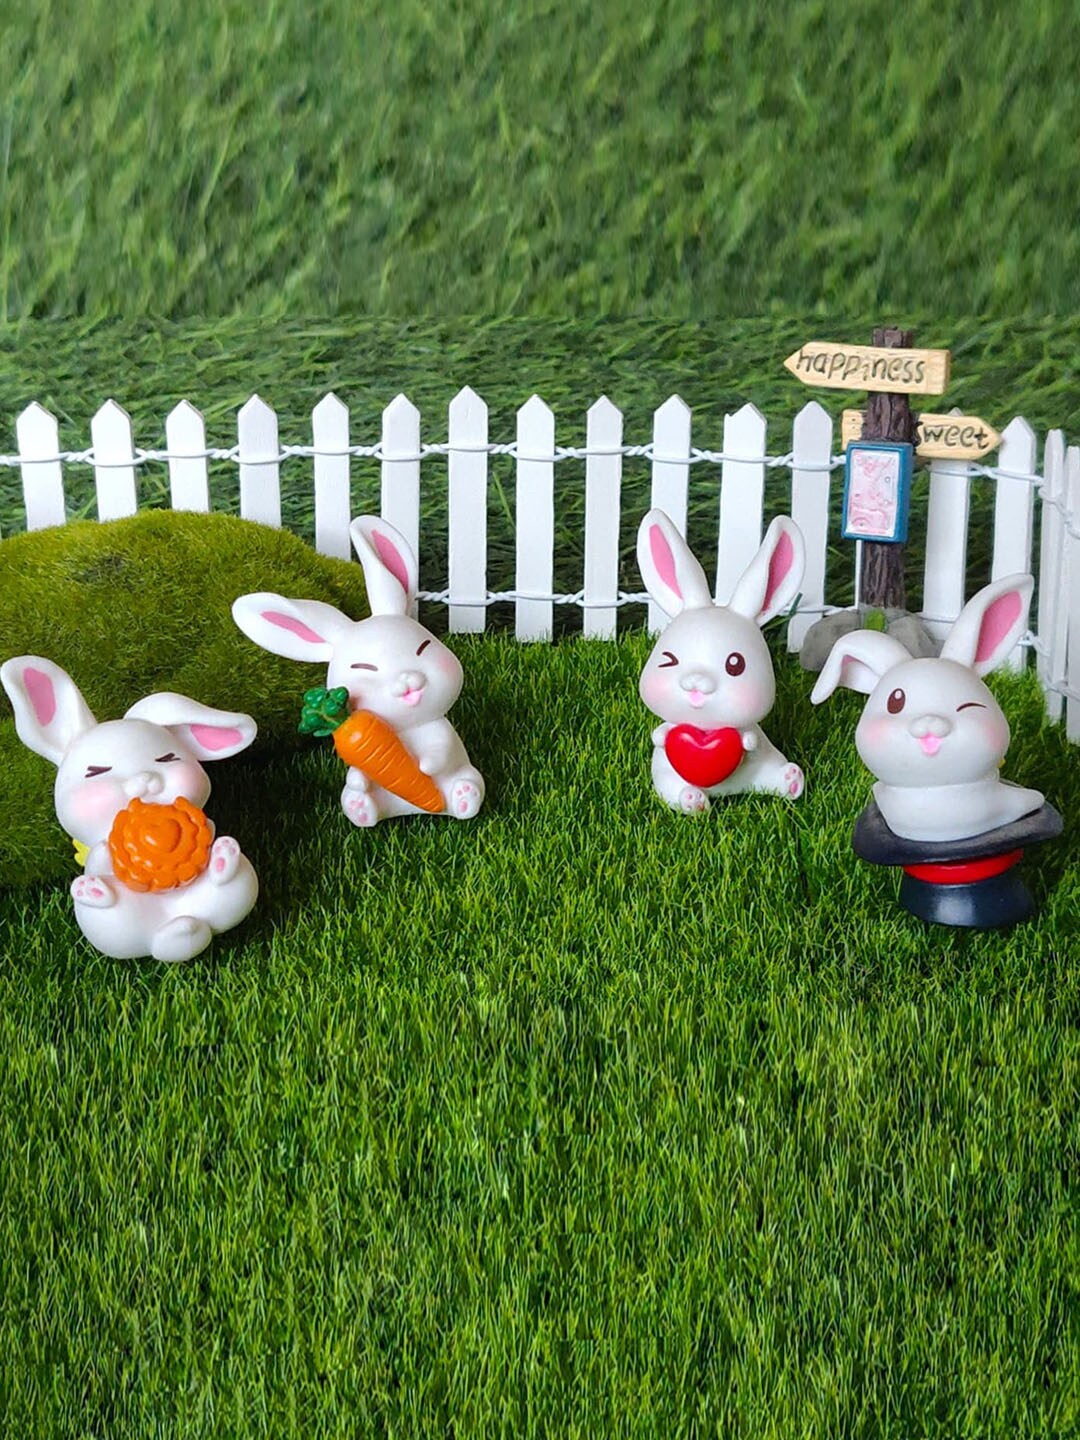 Wonderland Set Of 4 White & Pink Bunnies With Ears Up Miniature Garden Accessories Price in India